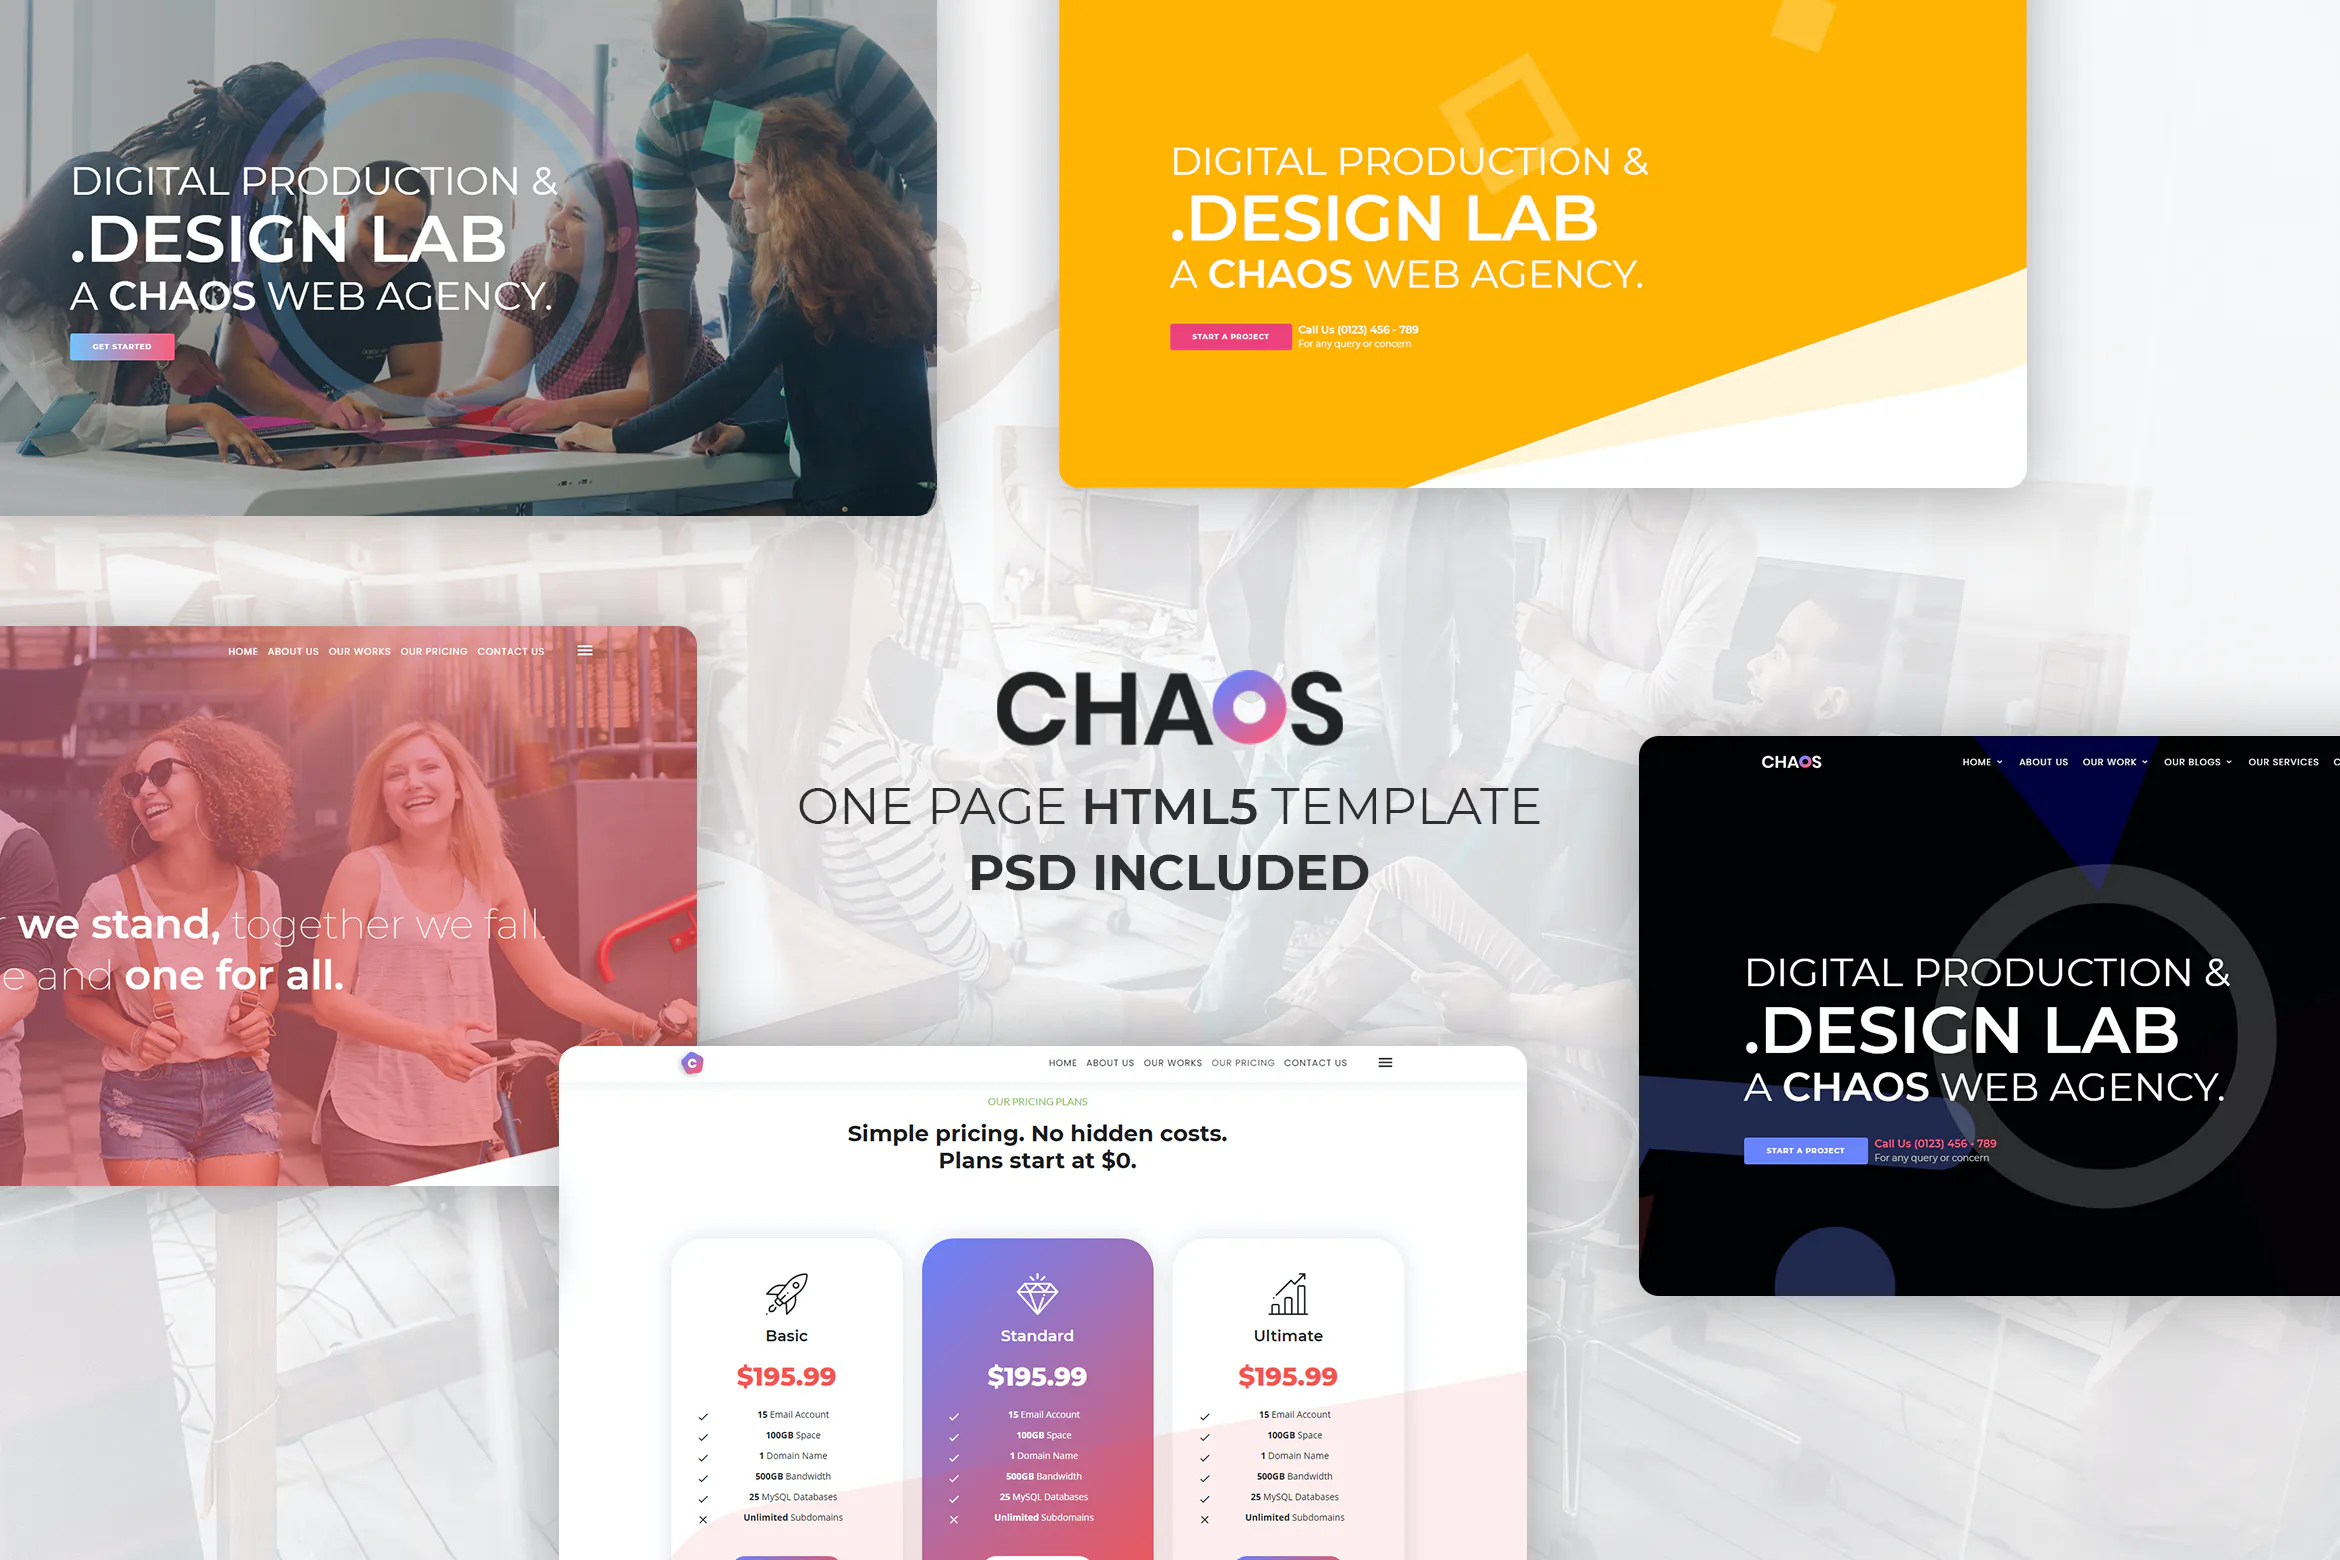 Chaos - Creative Parallax One Page HTML5 Template